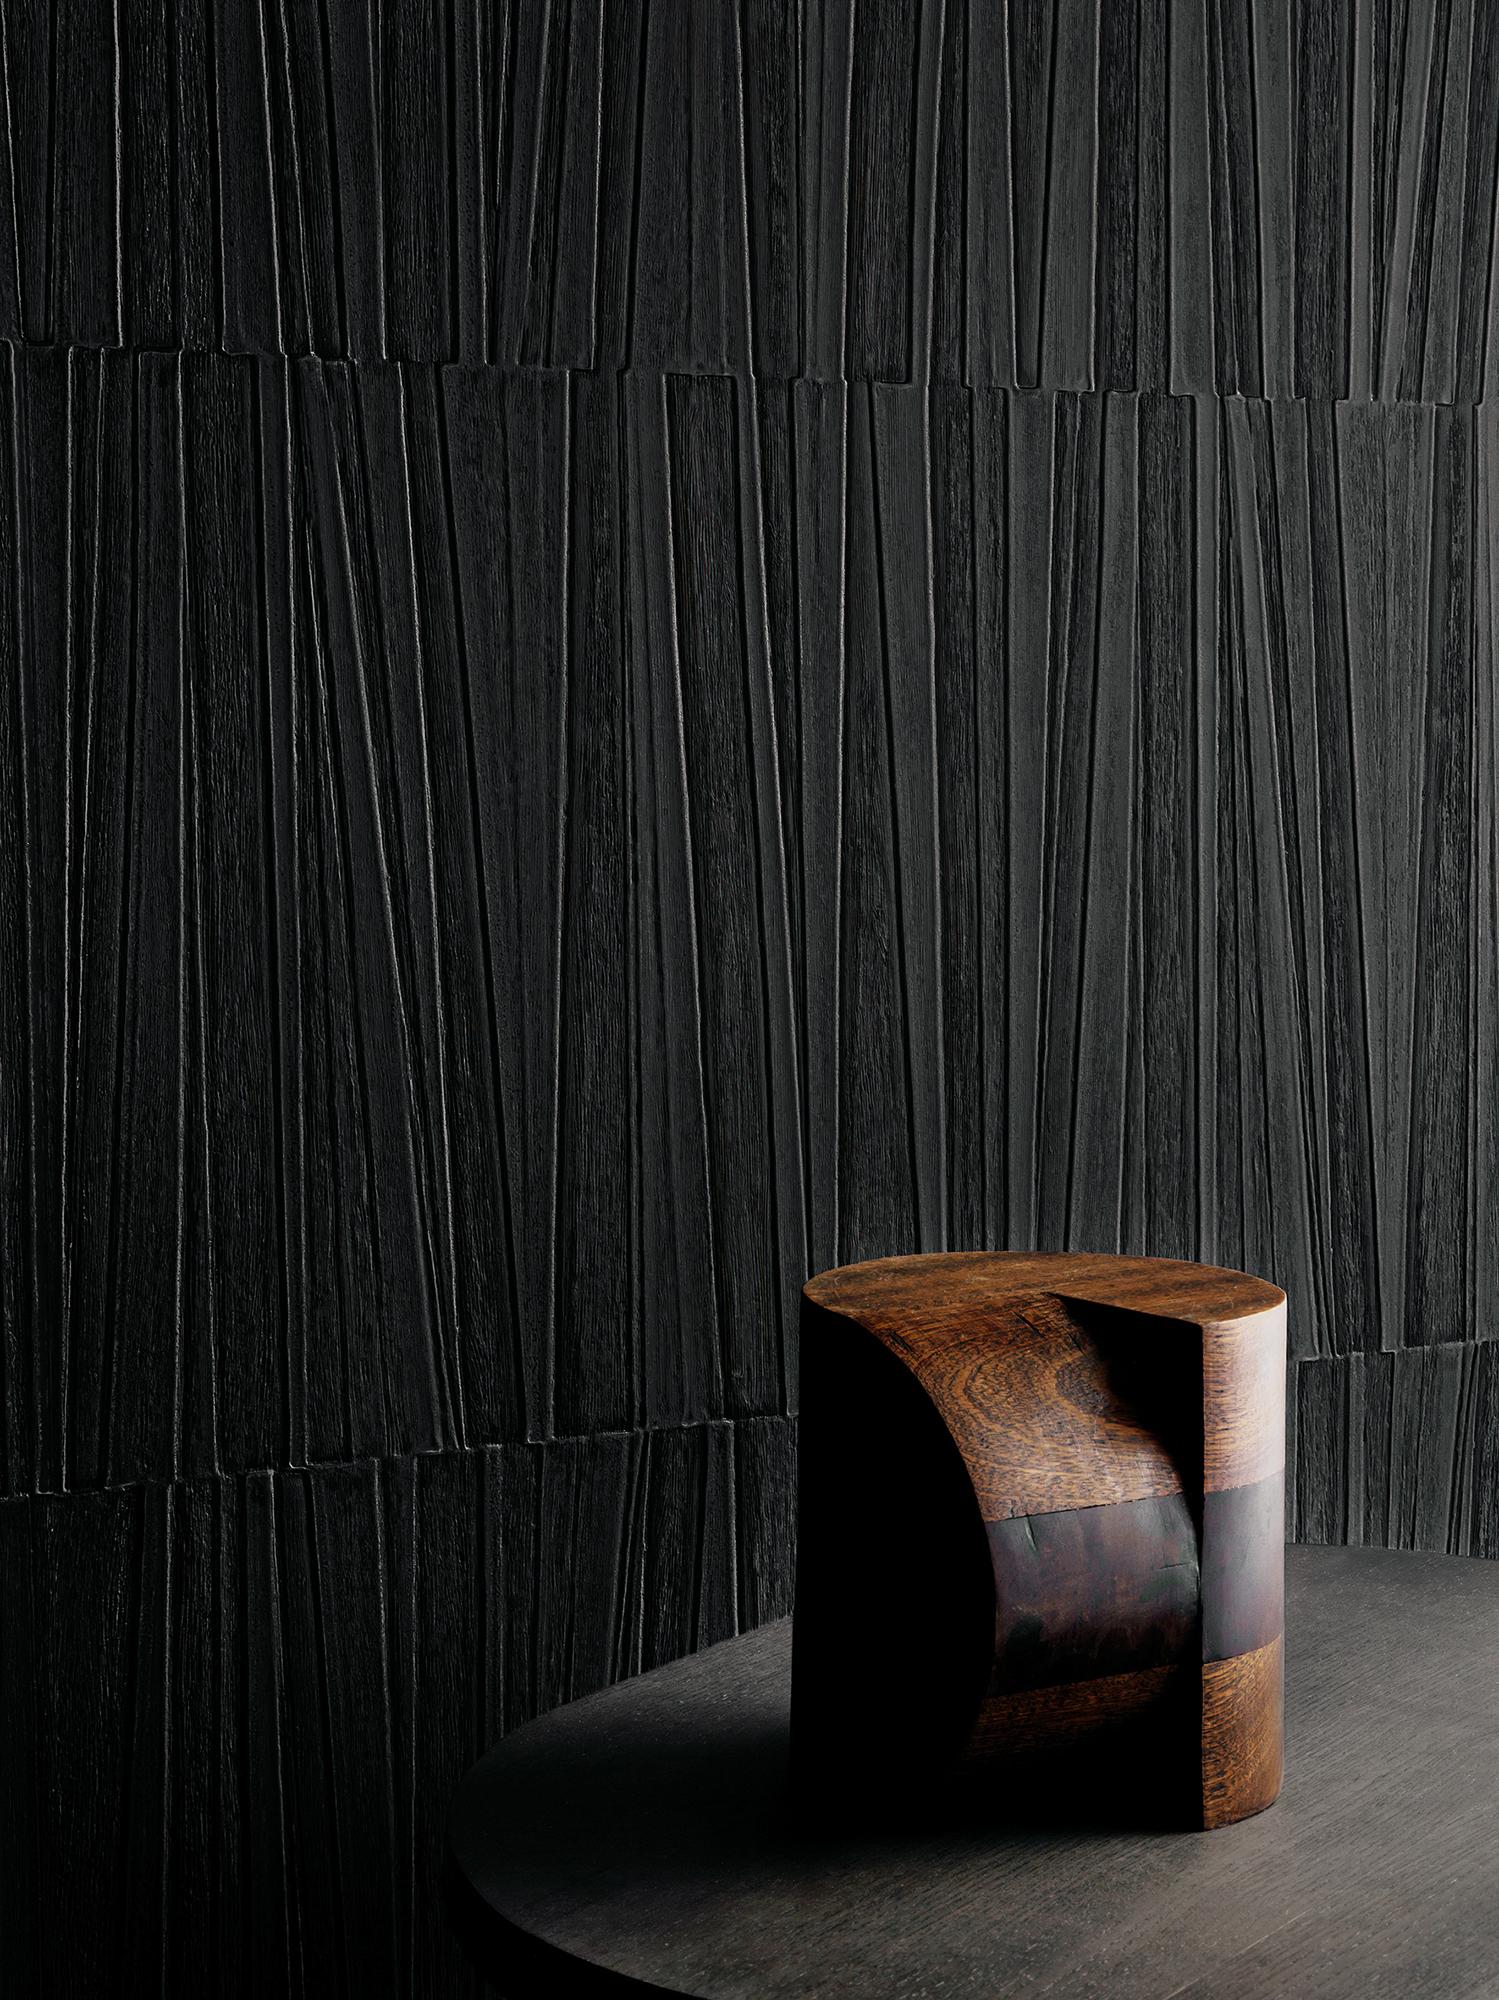 Essential wallpaper is the Wall&decò collection specifically dedicated to explore the creative possibilities of 3D textures, inlays, carvings and metal light details.

Engraved wallpaper in non-woven fabric and vinyl

Roll size 70 cm wide by